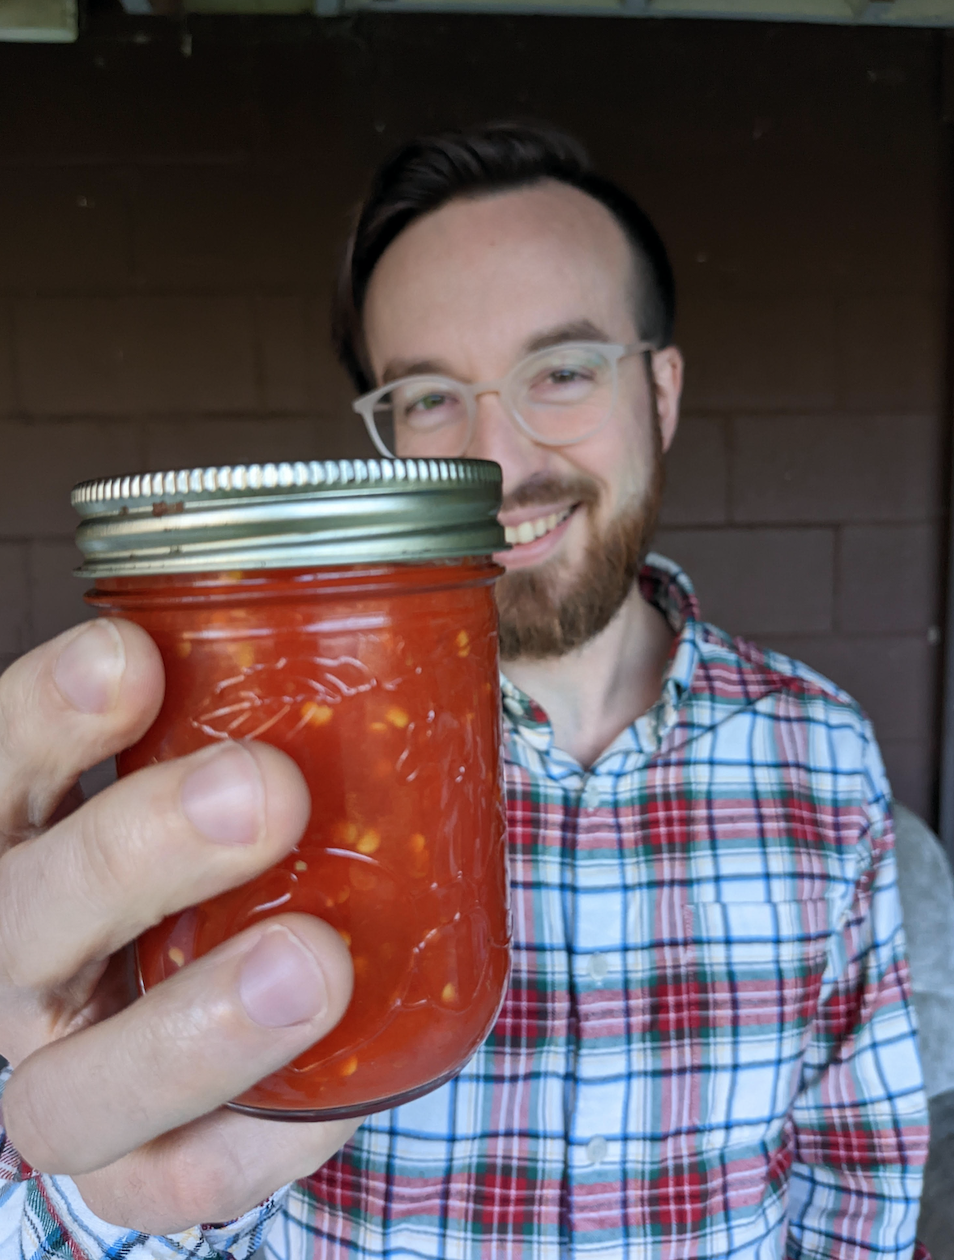 Previous Happening: Hot Sauce is finally here and Oyster Mushrooms in this weeks share!